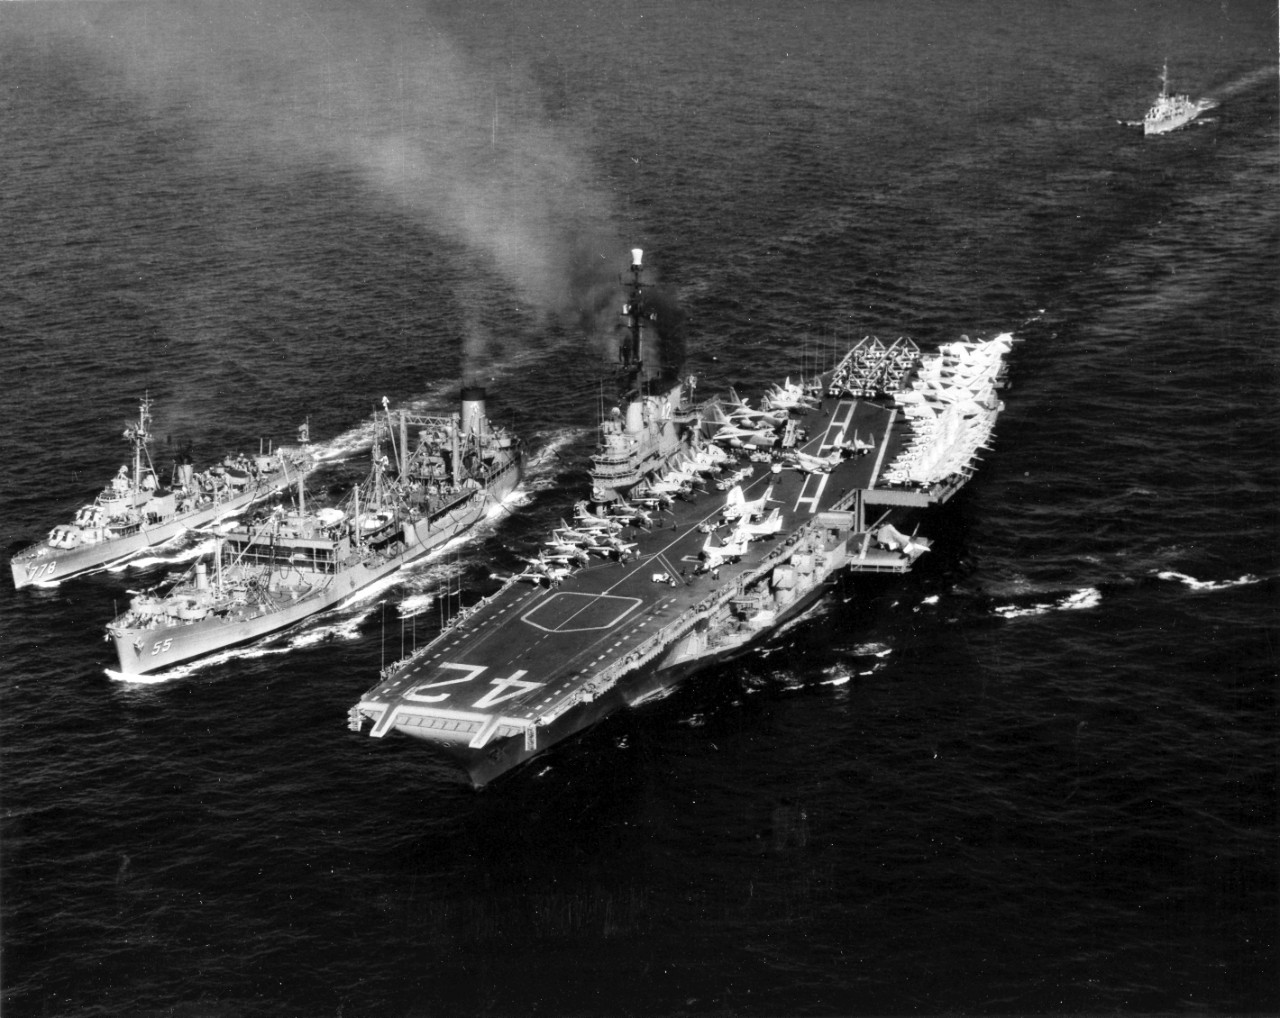 THe USS Masey (DD-778) and the aircraft carrier USS Franklin D. Roosevelt take time to refuel from the USS Elokomin (AO-55) during operations "Topweight" and "Green Swing", April 9-23, 1959. 